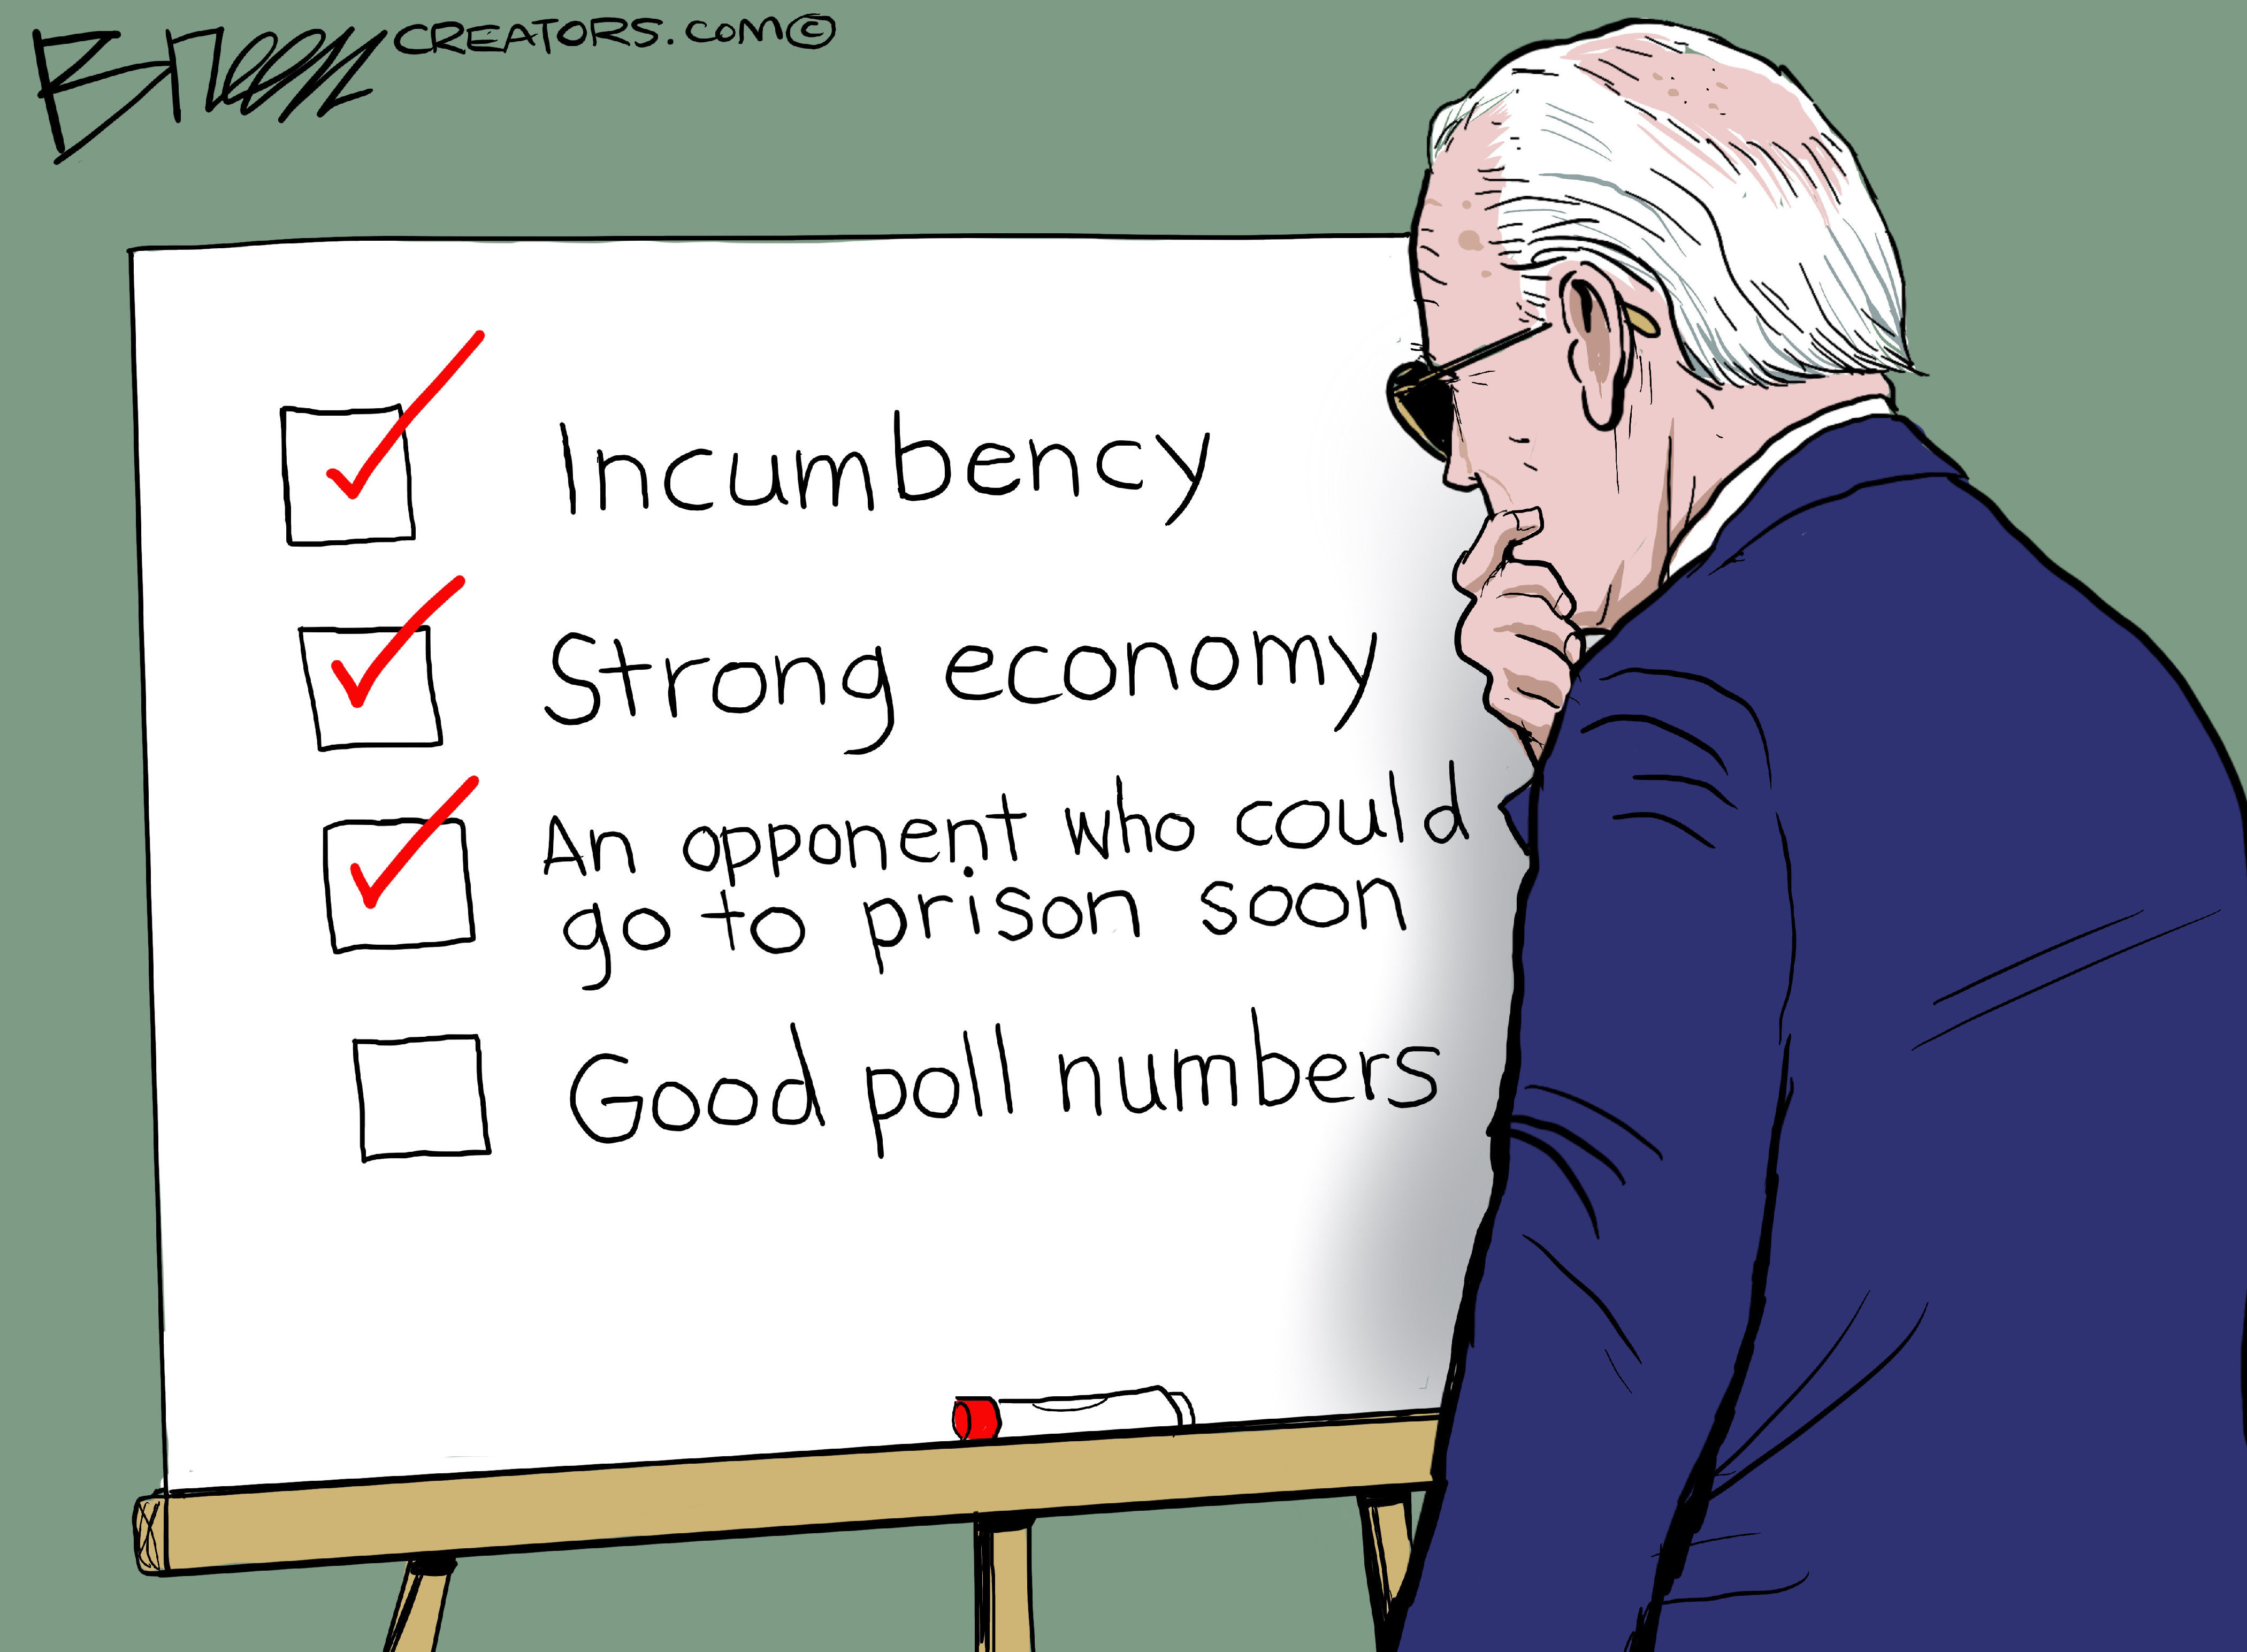  5 high rating cartoons about Biden's low poll numbers 